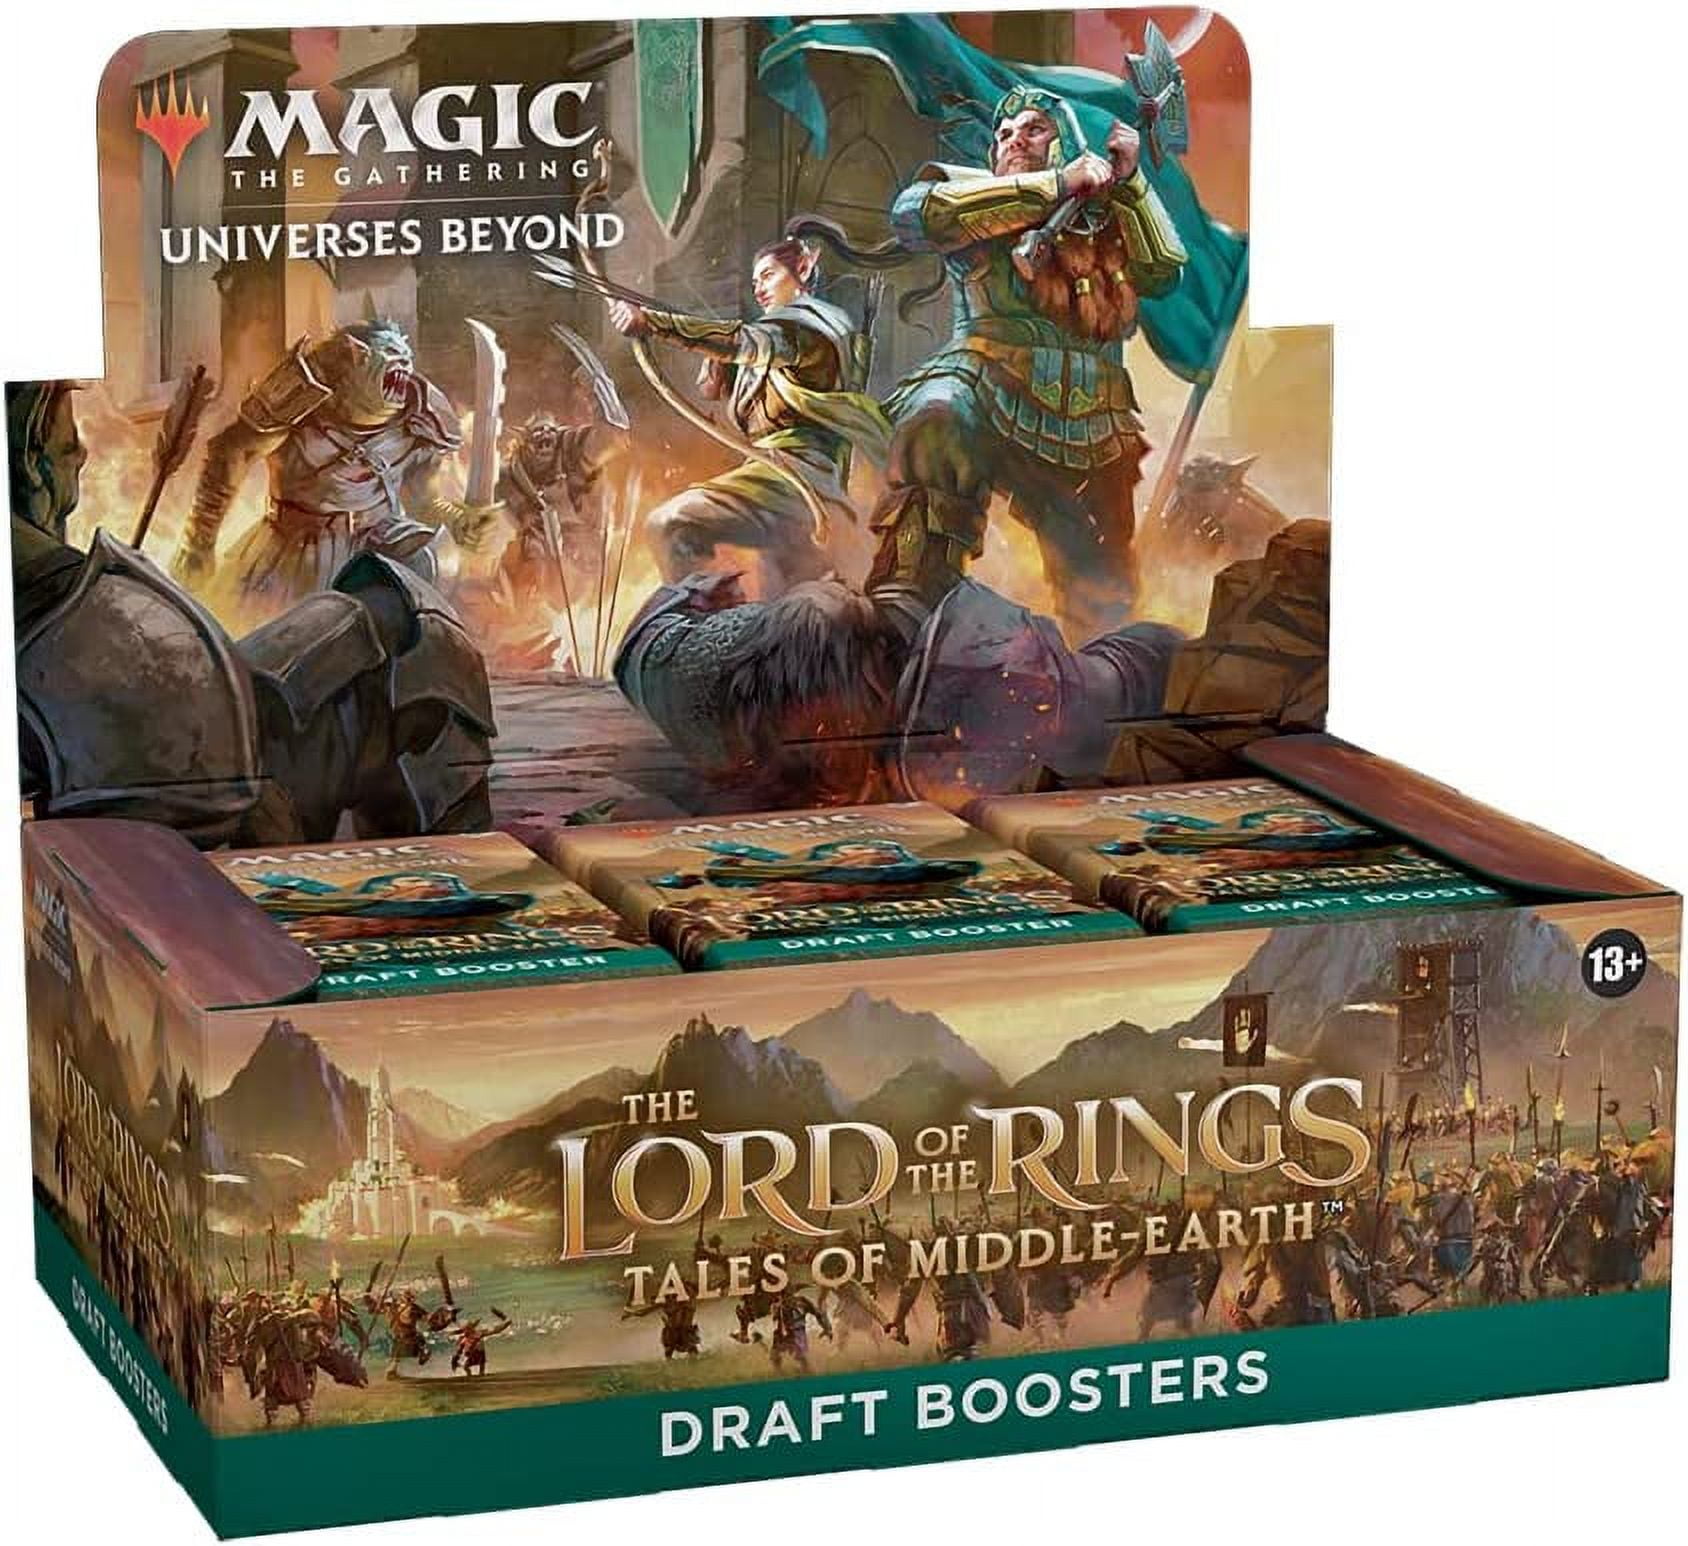  Magic: The Gathering The Lord of The Rings: Tales of  Middle-Earth Gift Bundle - 8 Set Boosters, 1 Collector Booster +  Accessories : Toys & Games